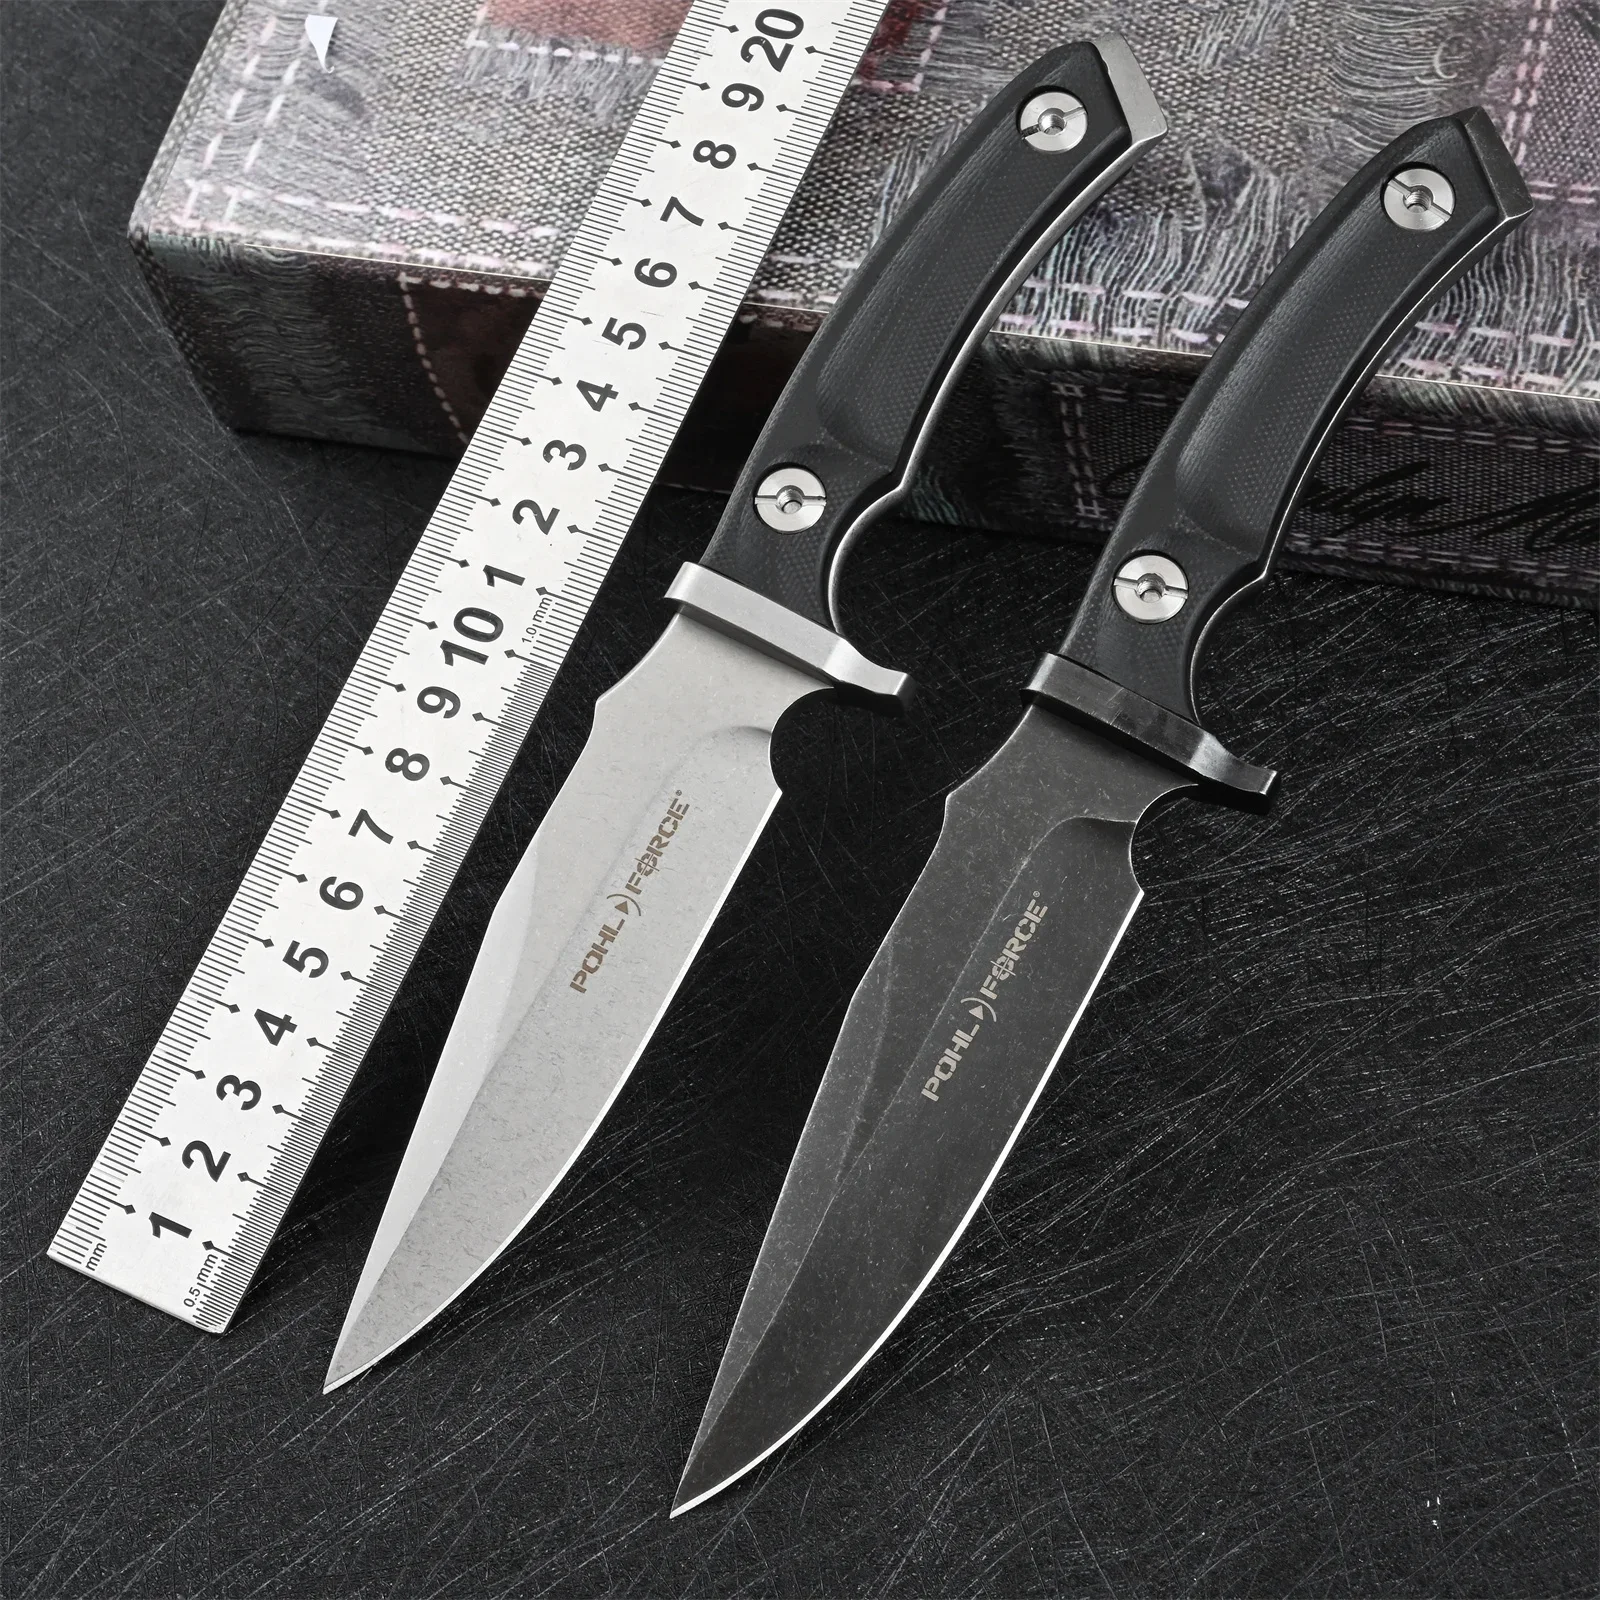 

MK8 D2 Steel G10 Handle Fixed Blade Knives with Sheath Hand Tools Tactical Knife For Men EDC Outdoor Camping Survival Hunting